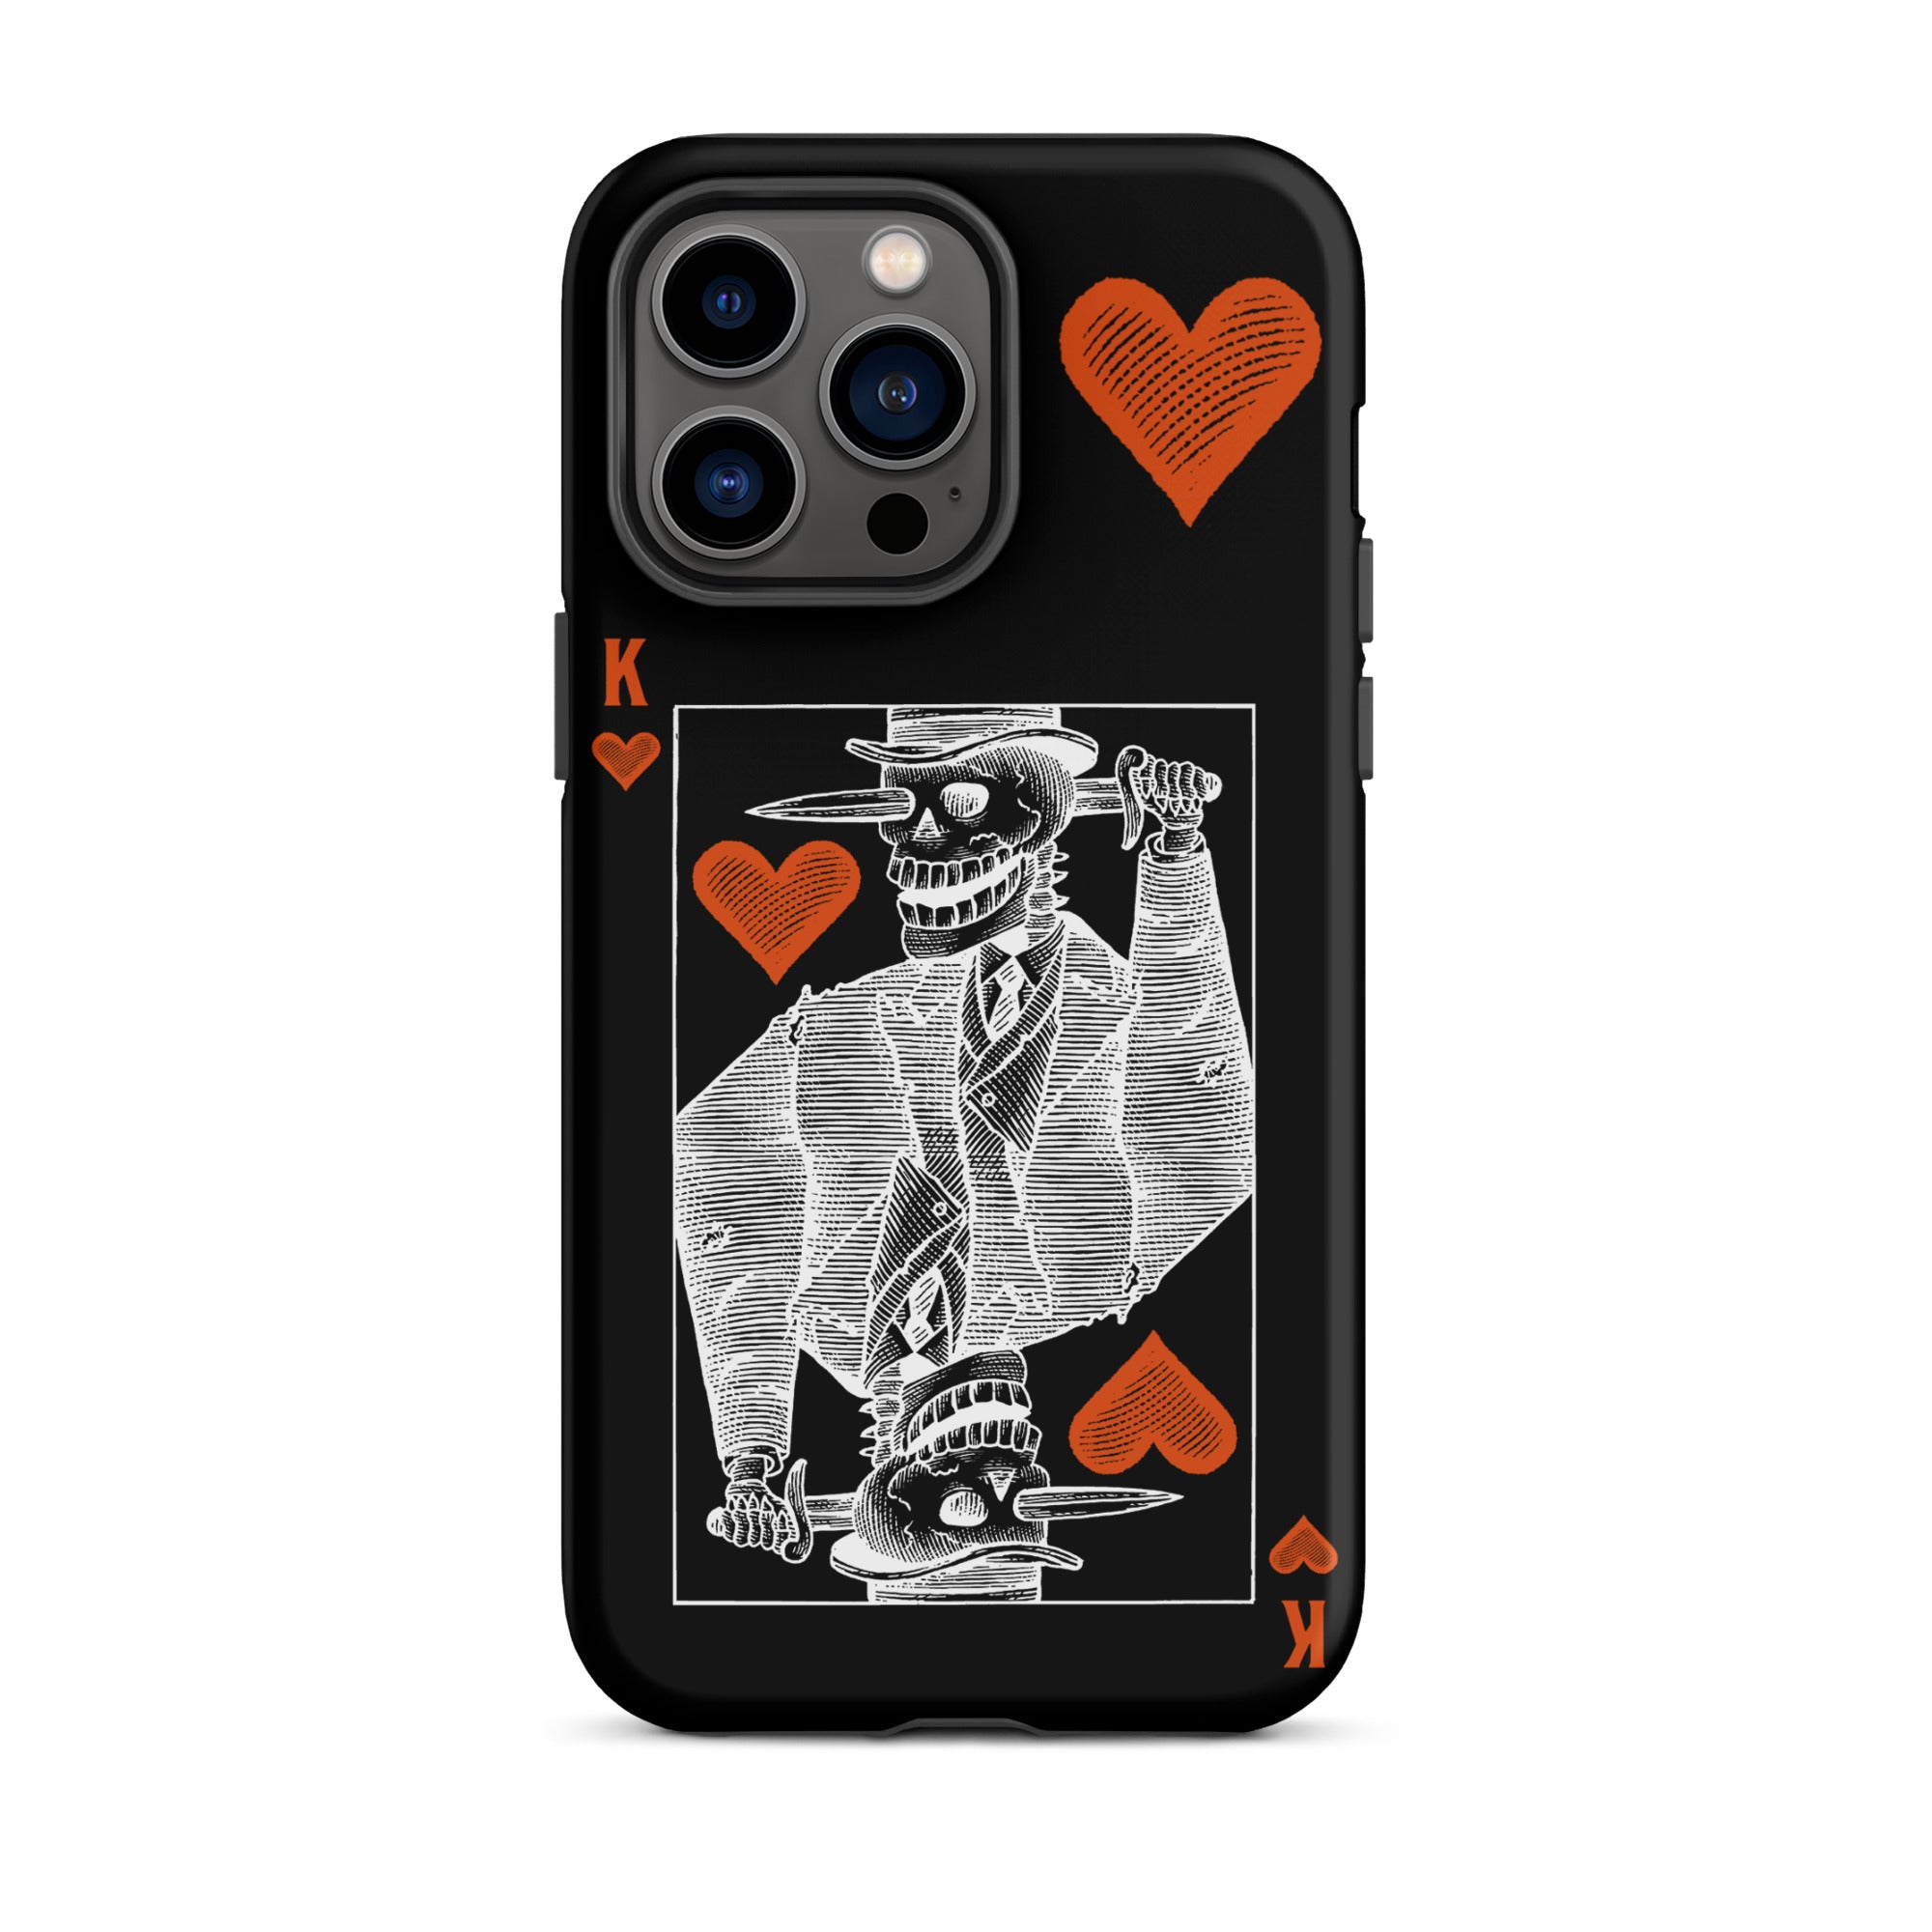 Fulton's October King of Hearts iPhone Case